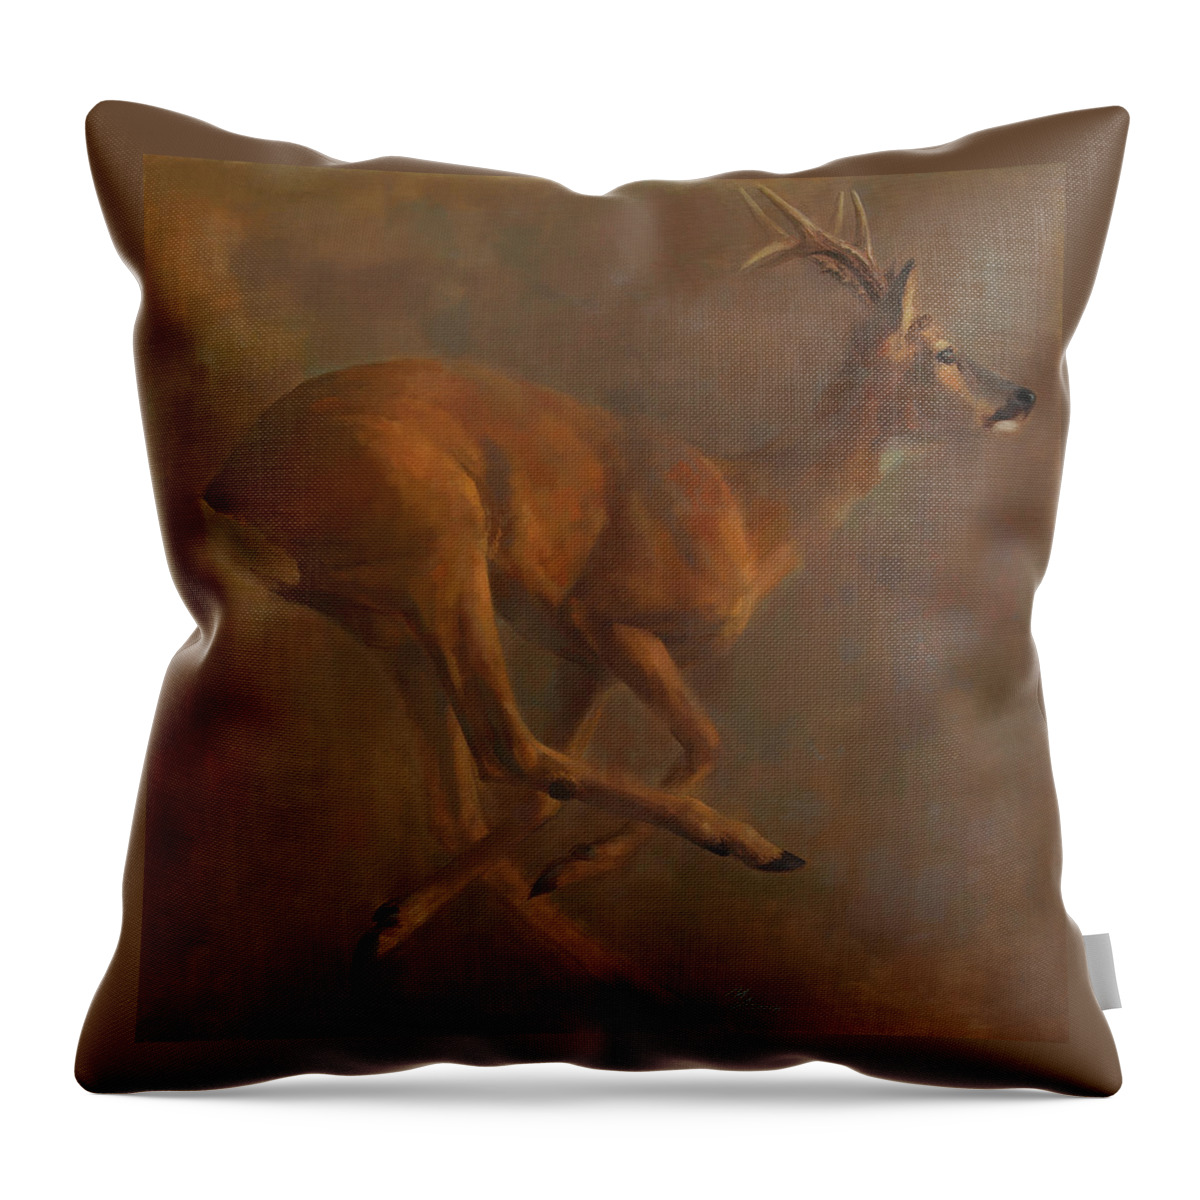 Running Roe Throw Pillow featuring the painting Running Roe by Attila Meszlenyi